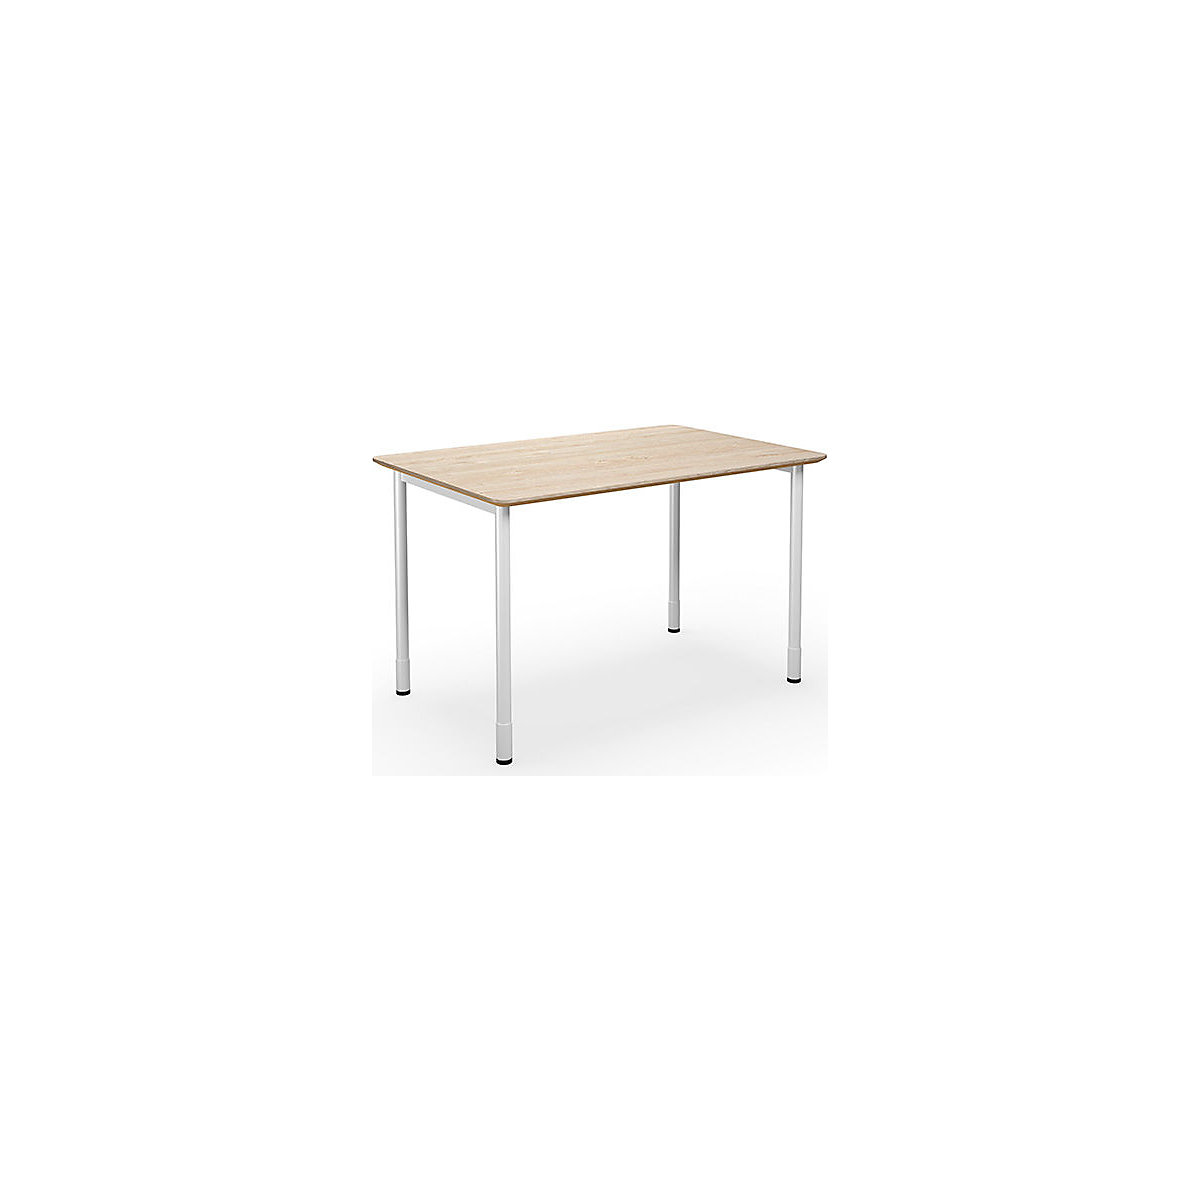 DUO-C Trend multi-purpose desk, straight tabletop, rounded corners